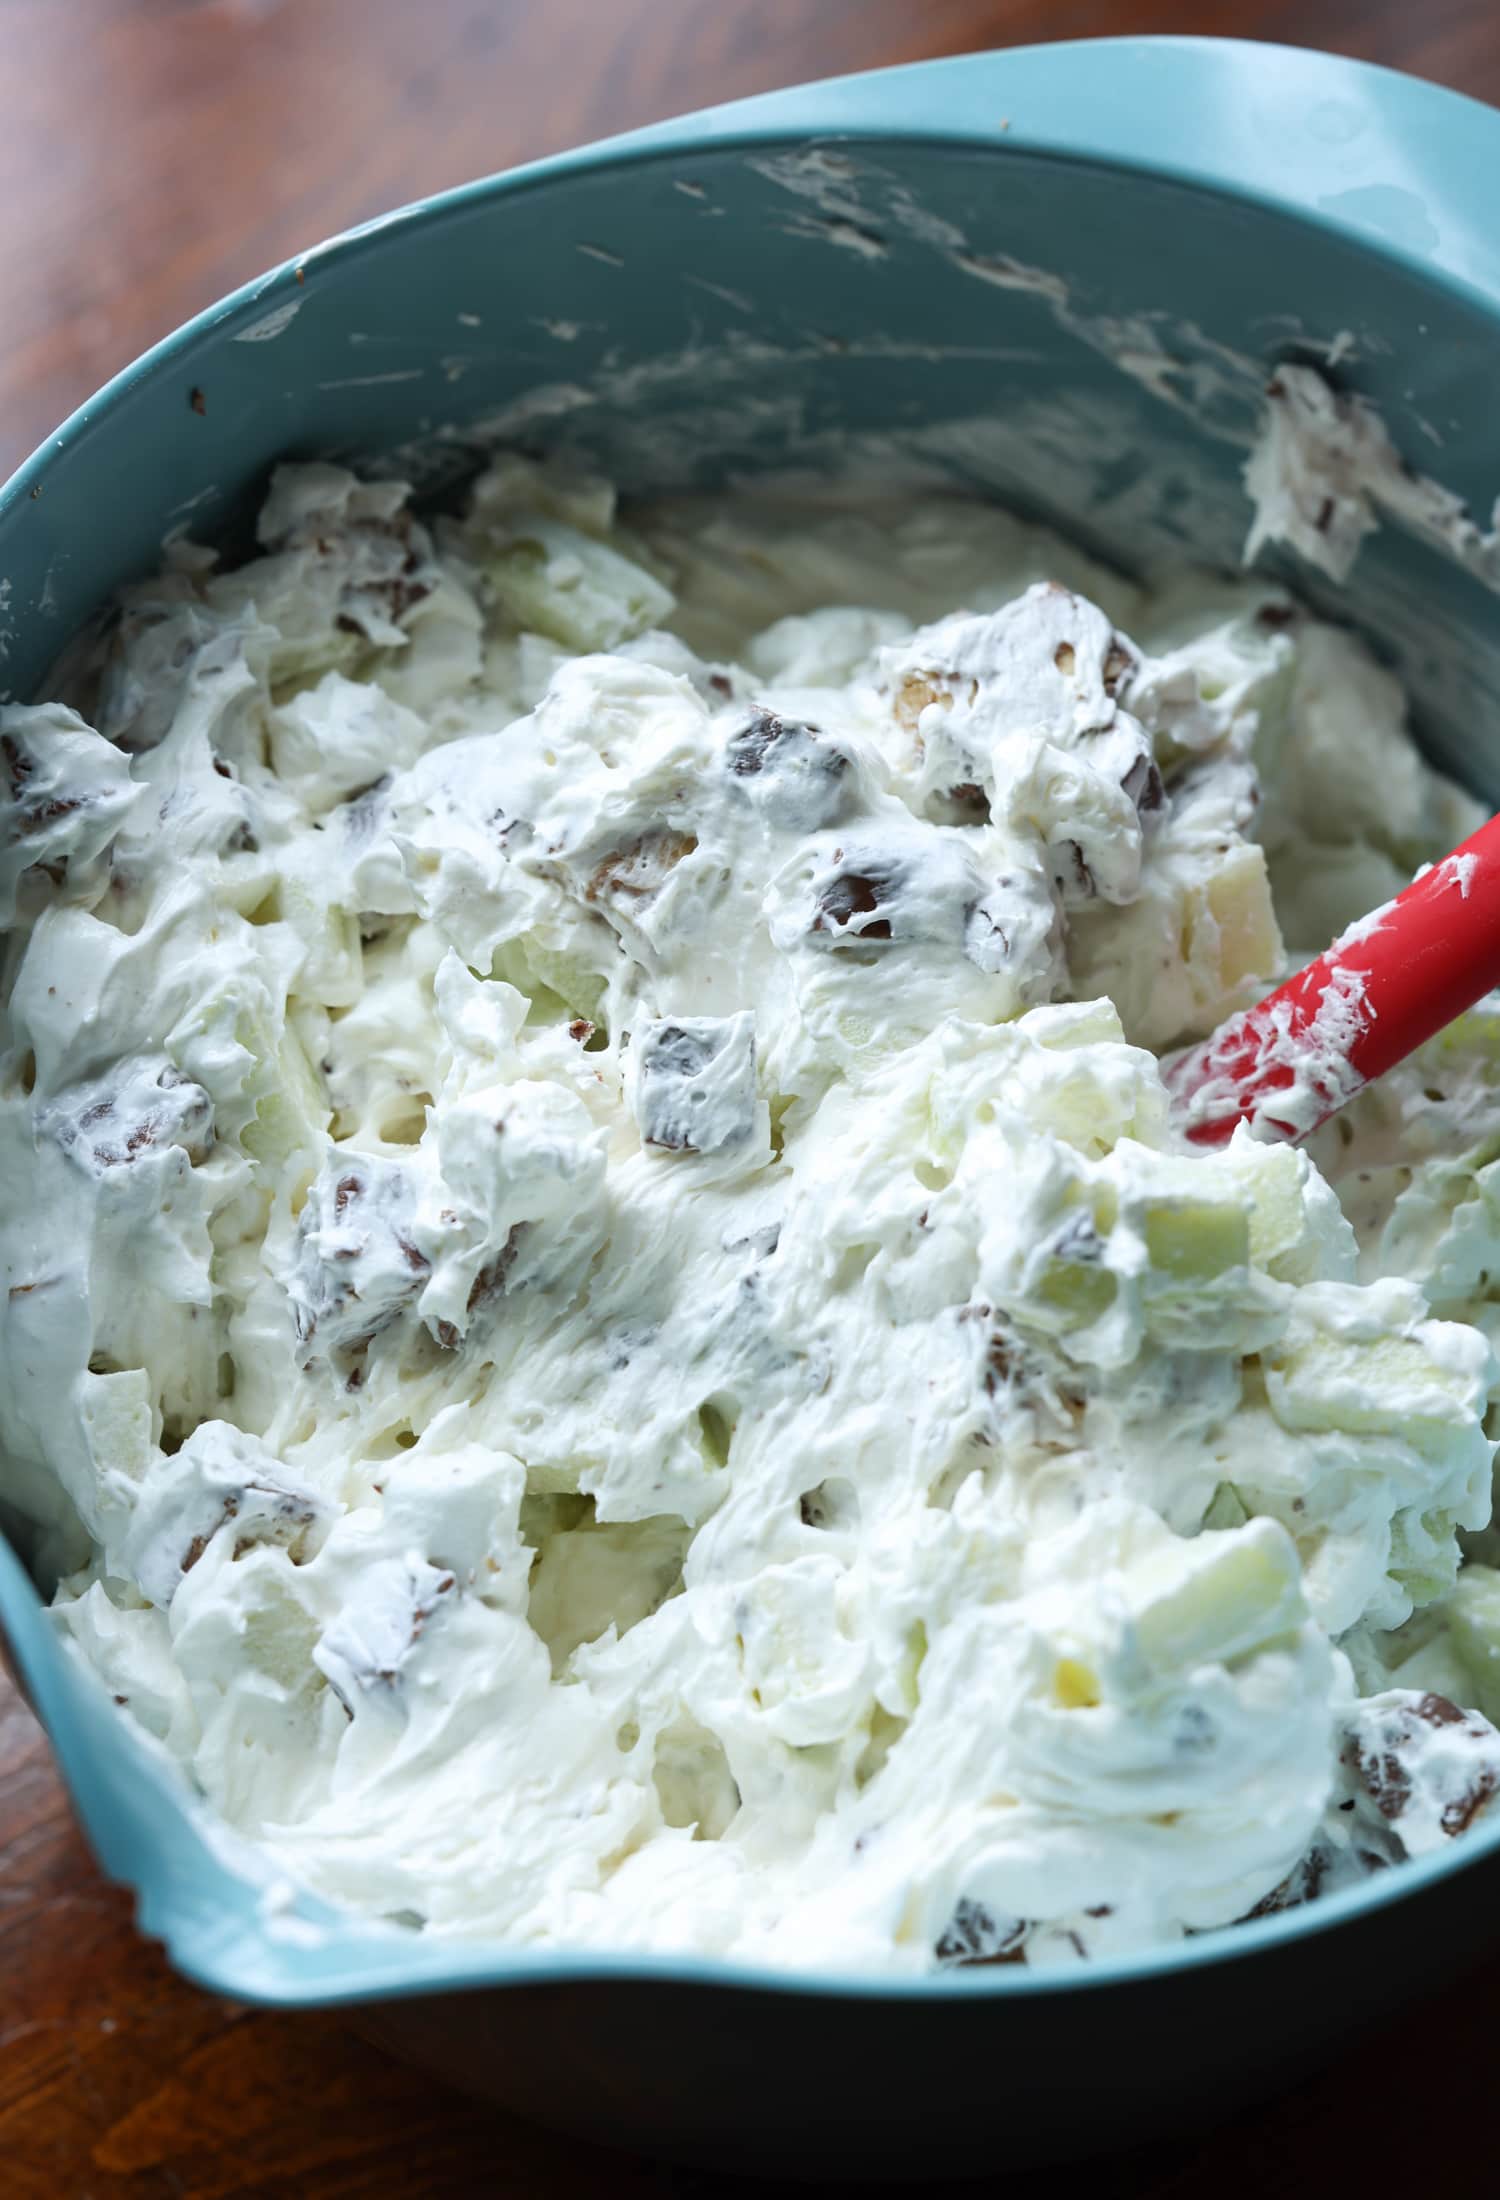 cream cheese, cool whip, chopped snickers, chopped apples, and mini marshmallows in a mixing bowl with a red rubber spatula